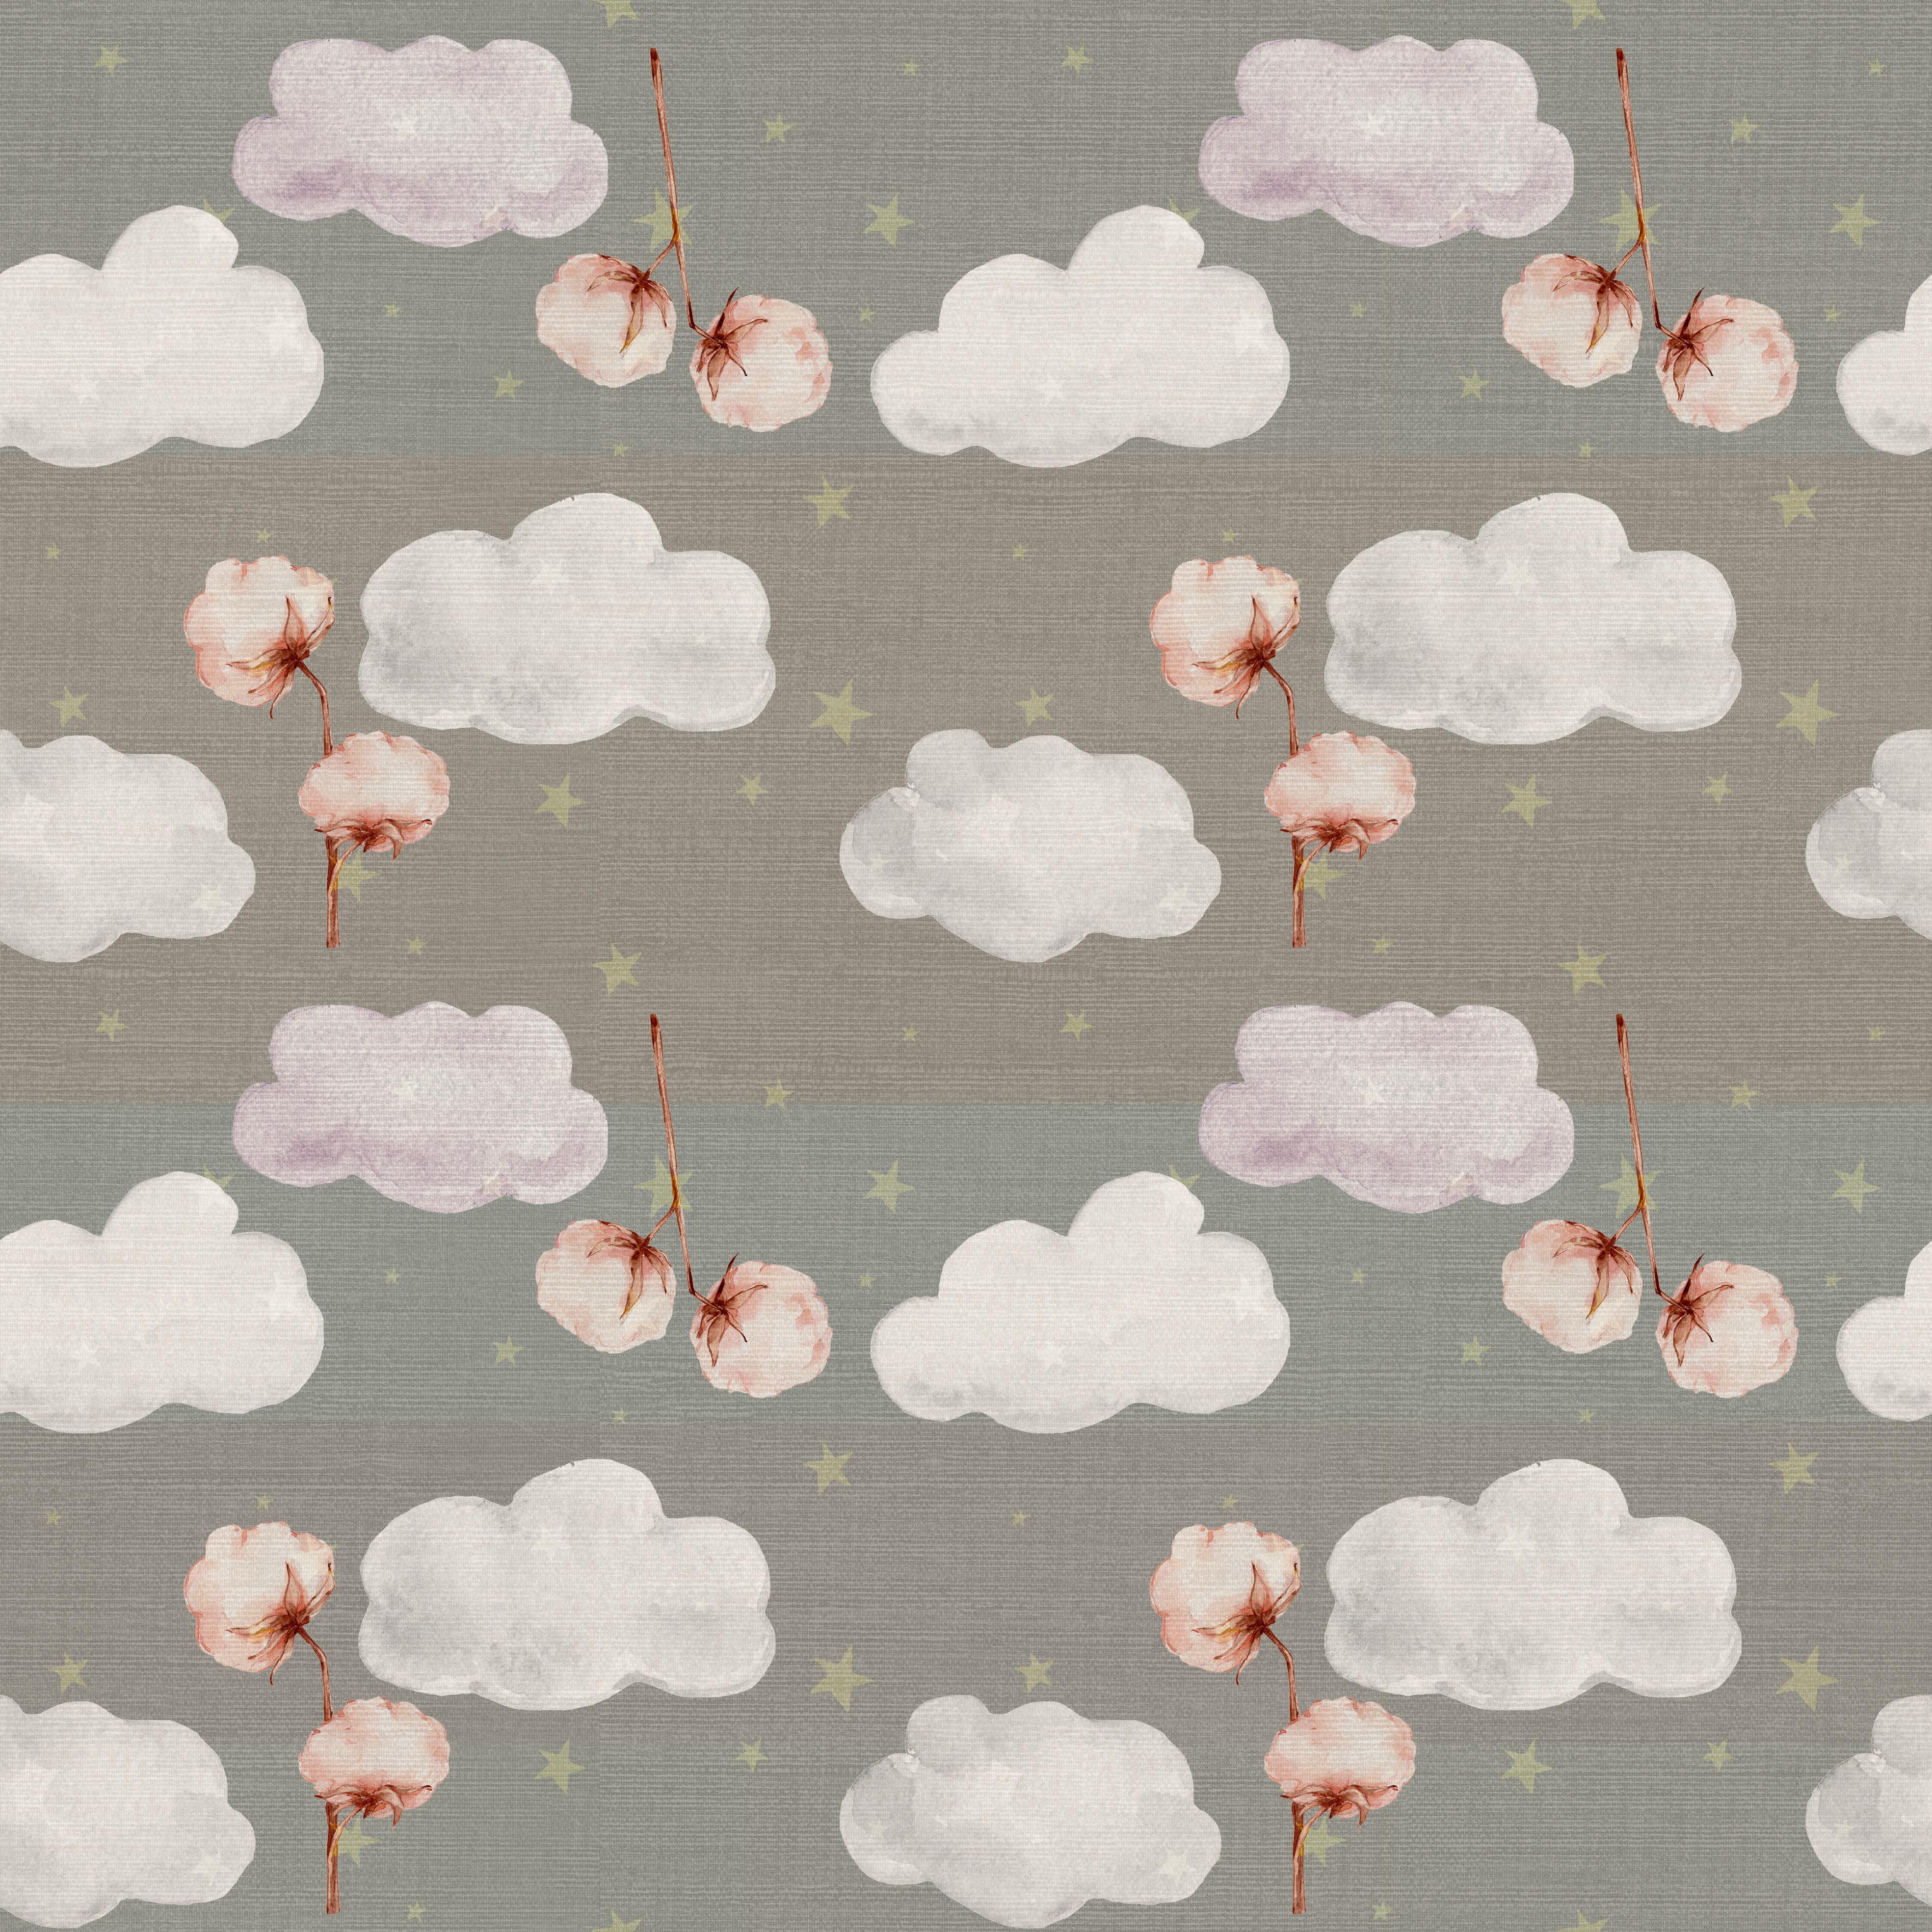 orn22_cnt_001-  Pichilì a collection of wallpaper for children with their delicate presence. The undisputed protagonists of these spaces, they live in a different world, one which requires protection, and faithfully accompany the young residents in